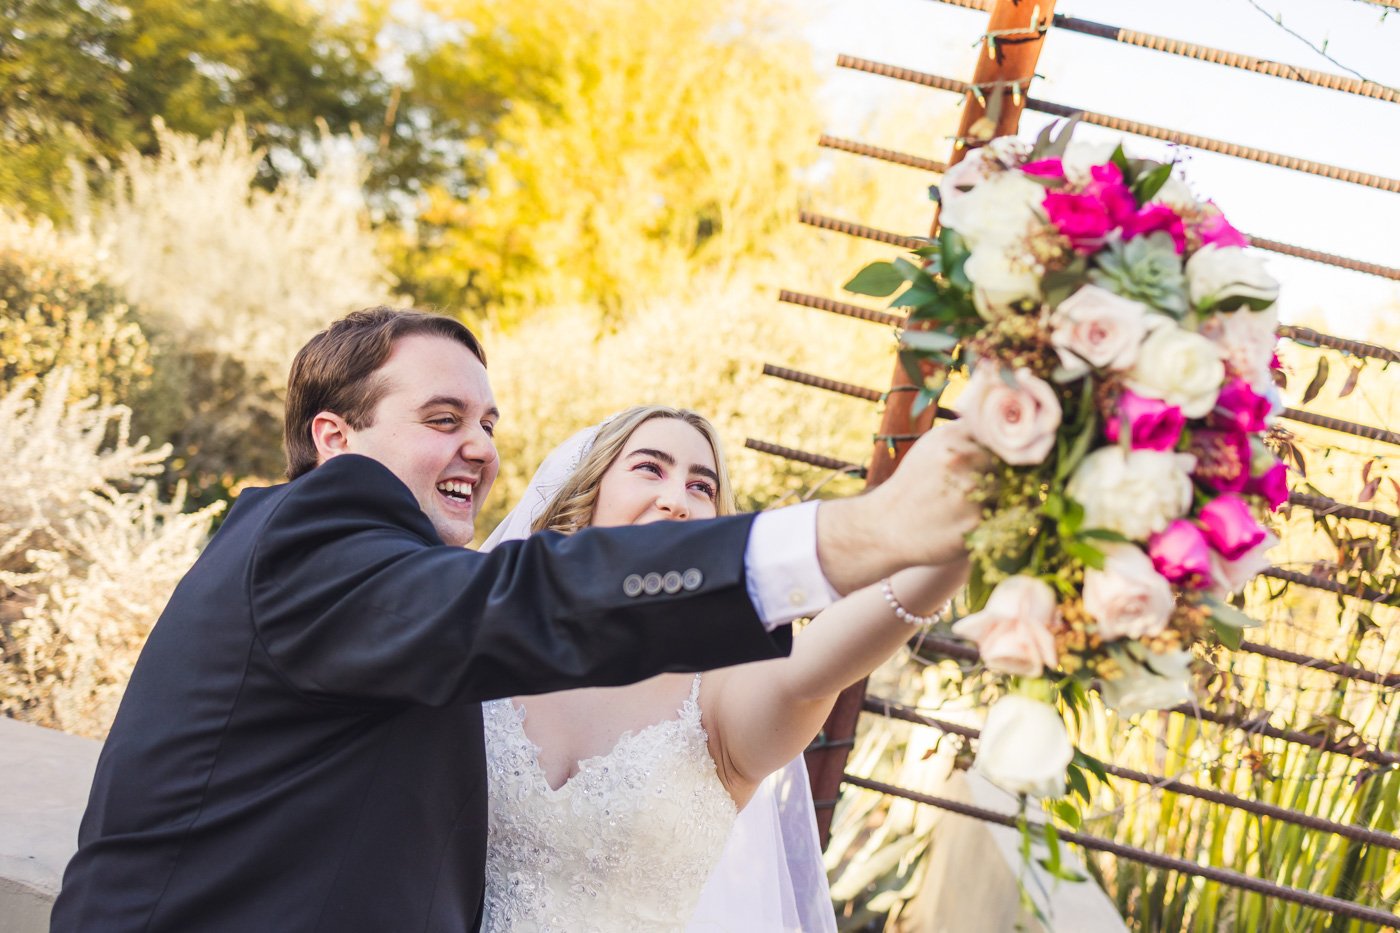 bride and groom having fun holding up bouquet together laughing